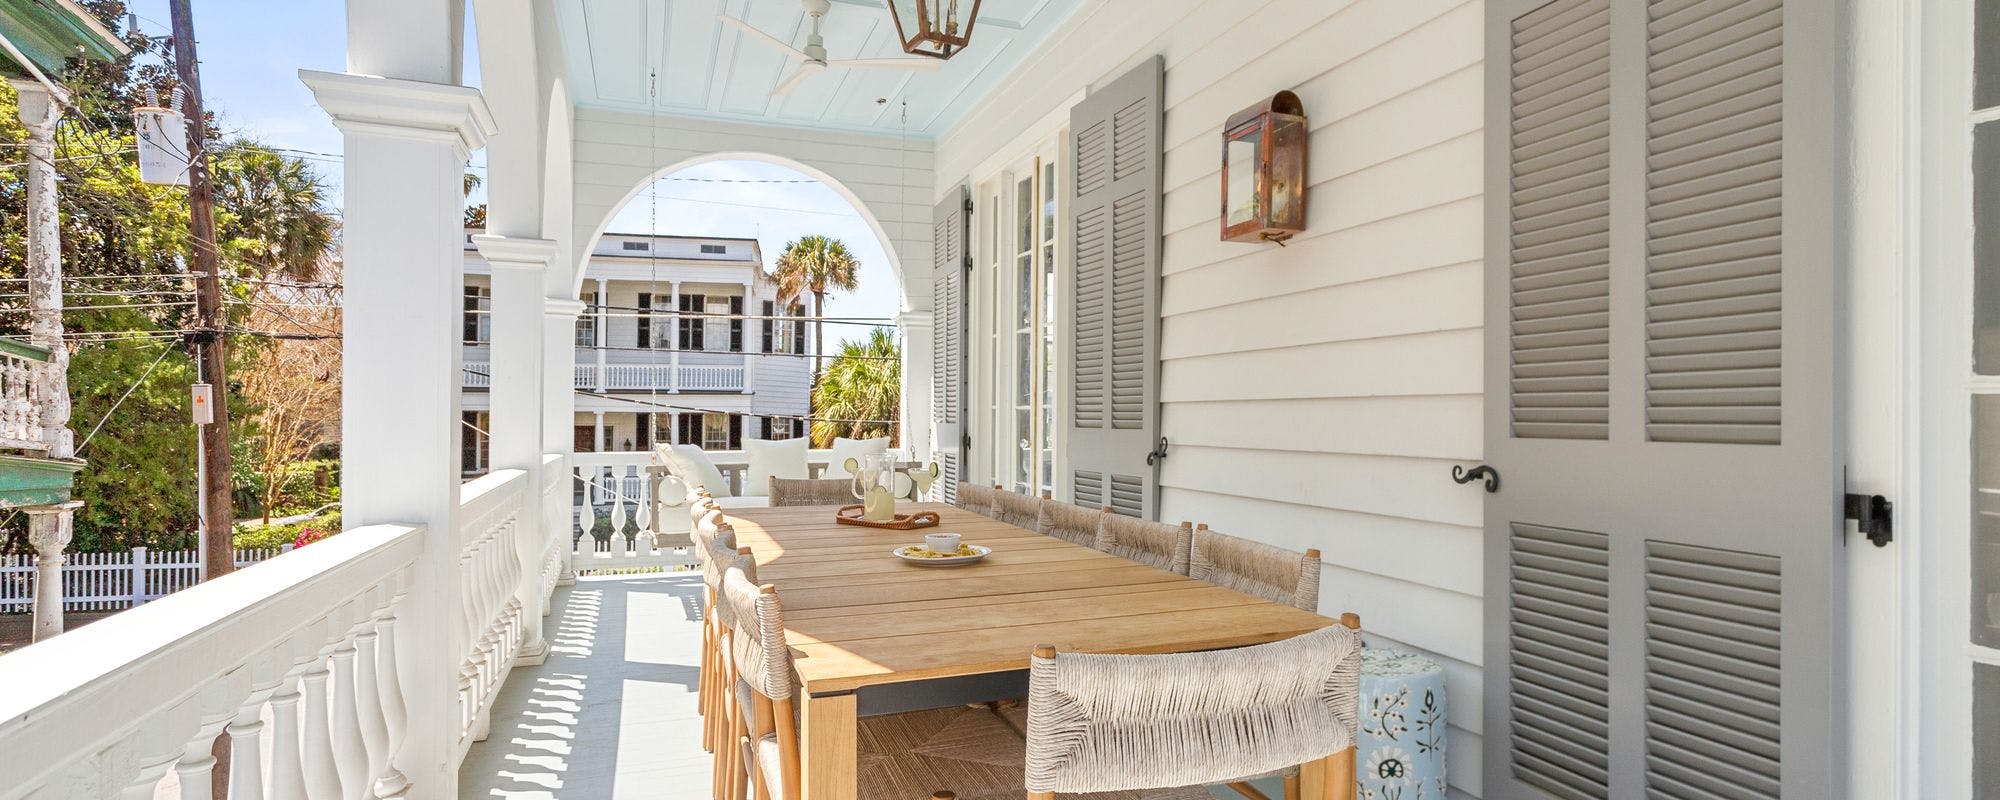 Vacation rental porch with seating in Charleston, SC